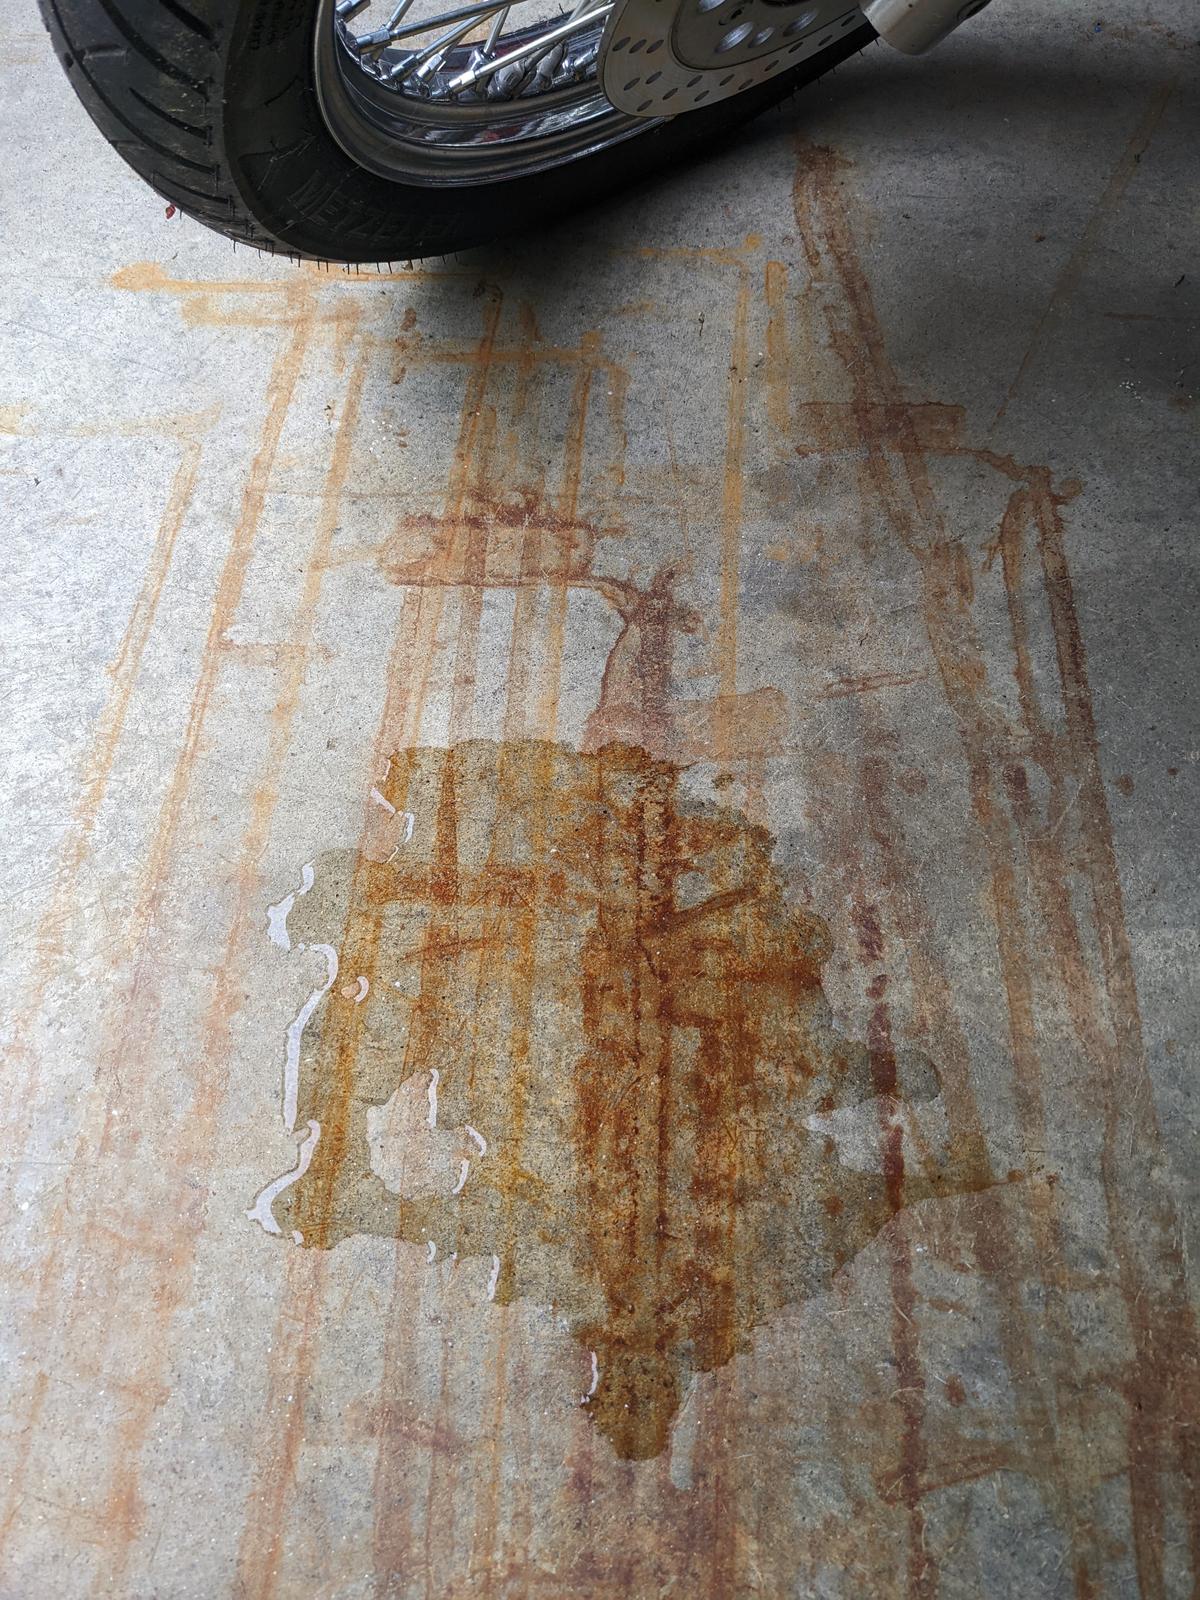 BEFORE: These are rust stains on a garage floor left by a snowblower. The puddle in the middle is an oxalic acid solution. (Tim Carter/TNS)